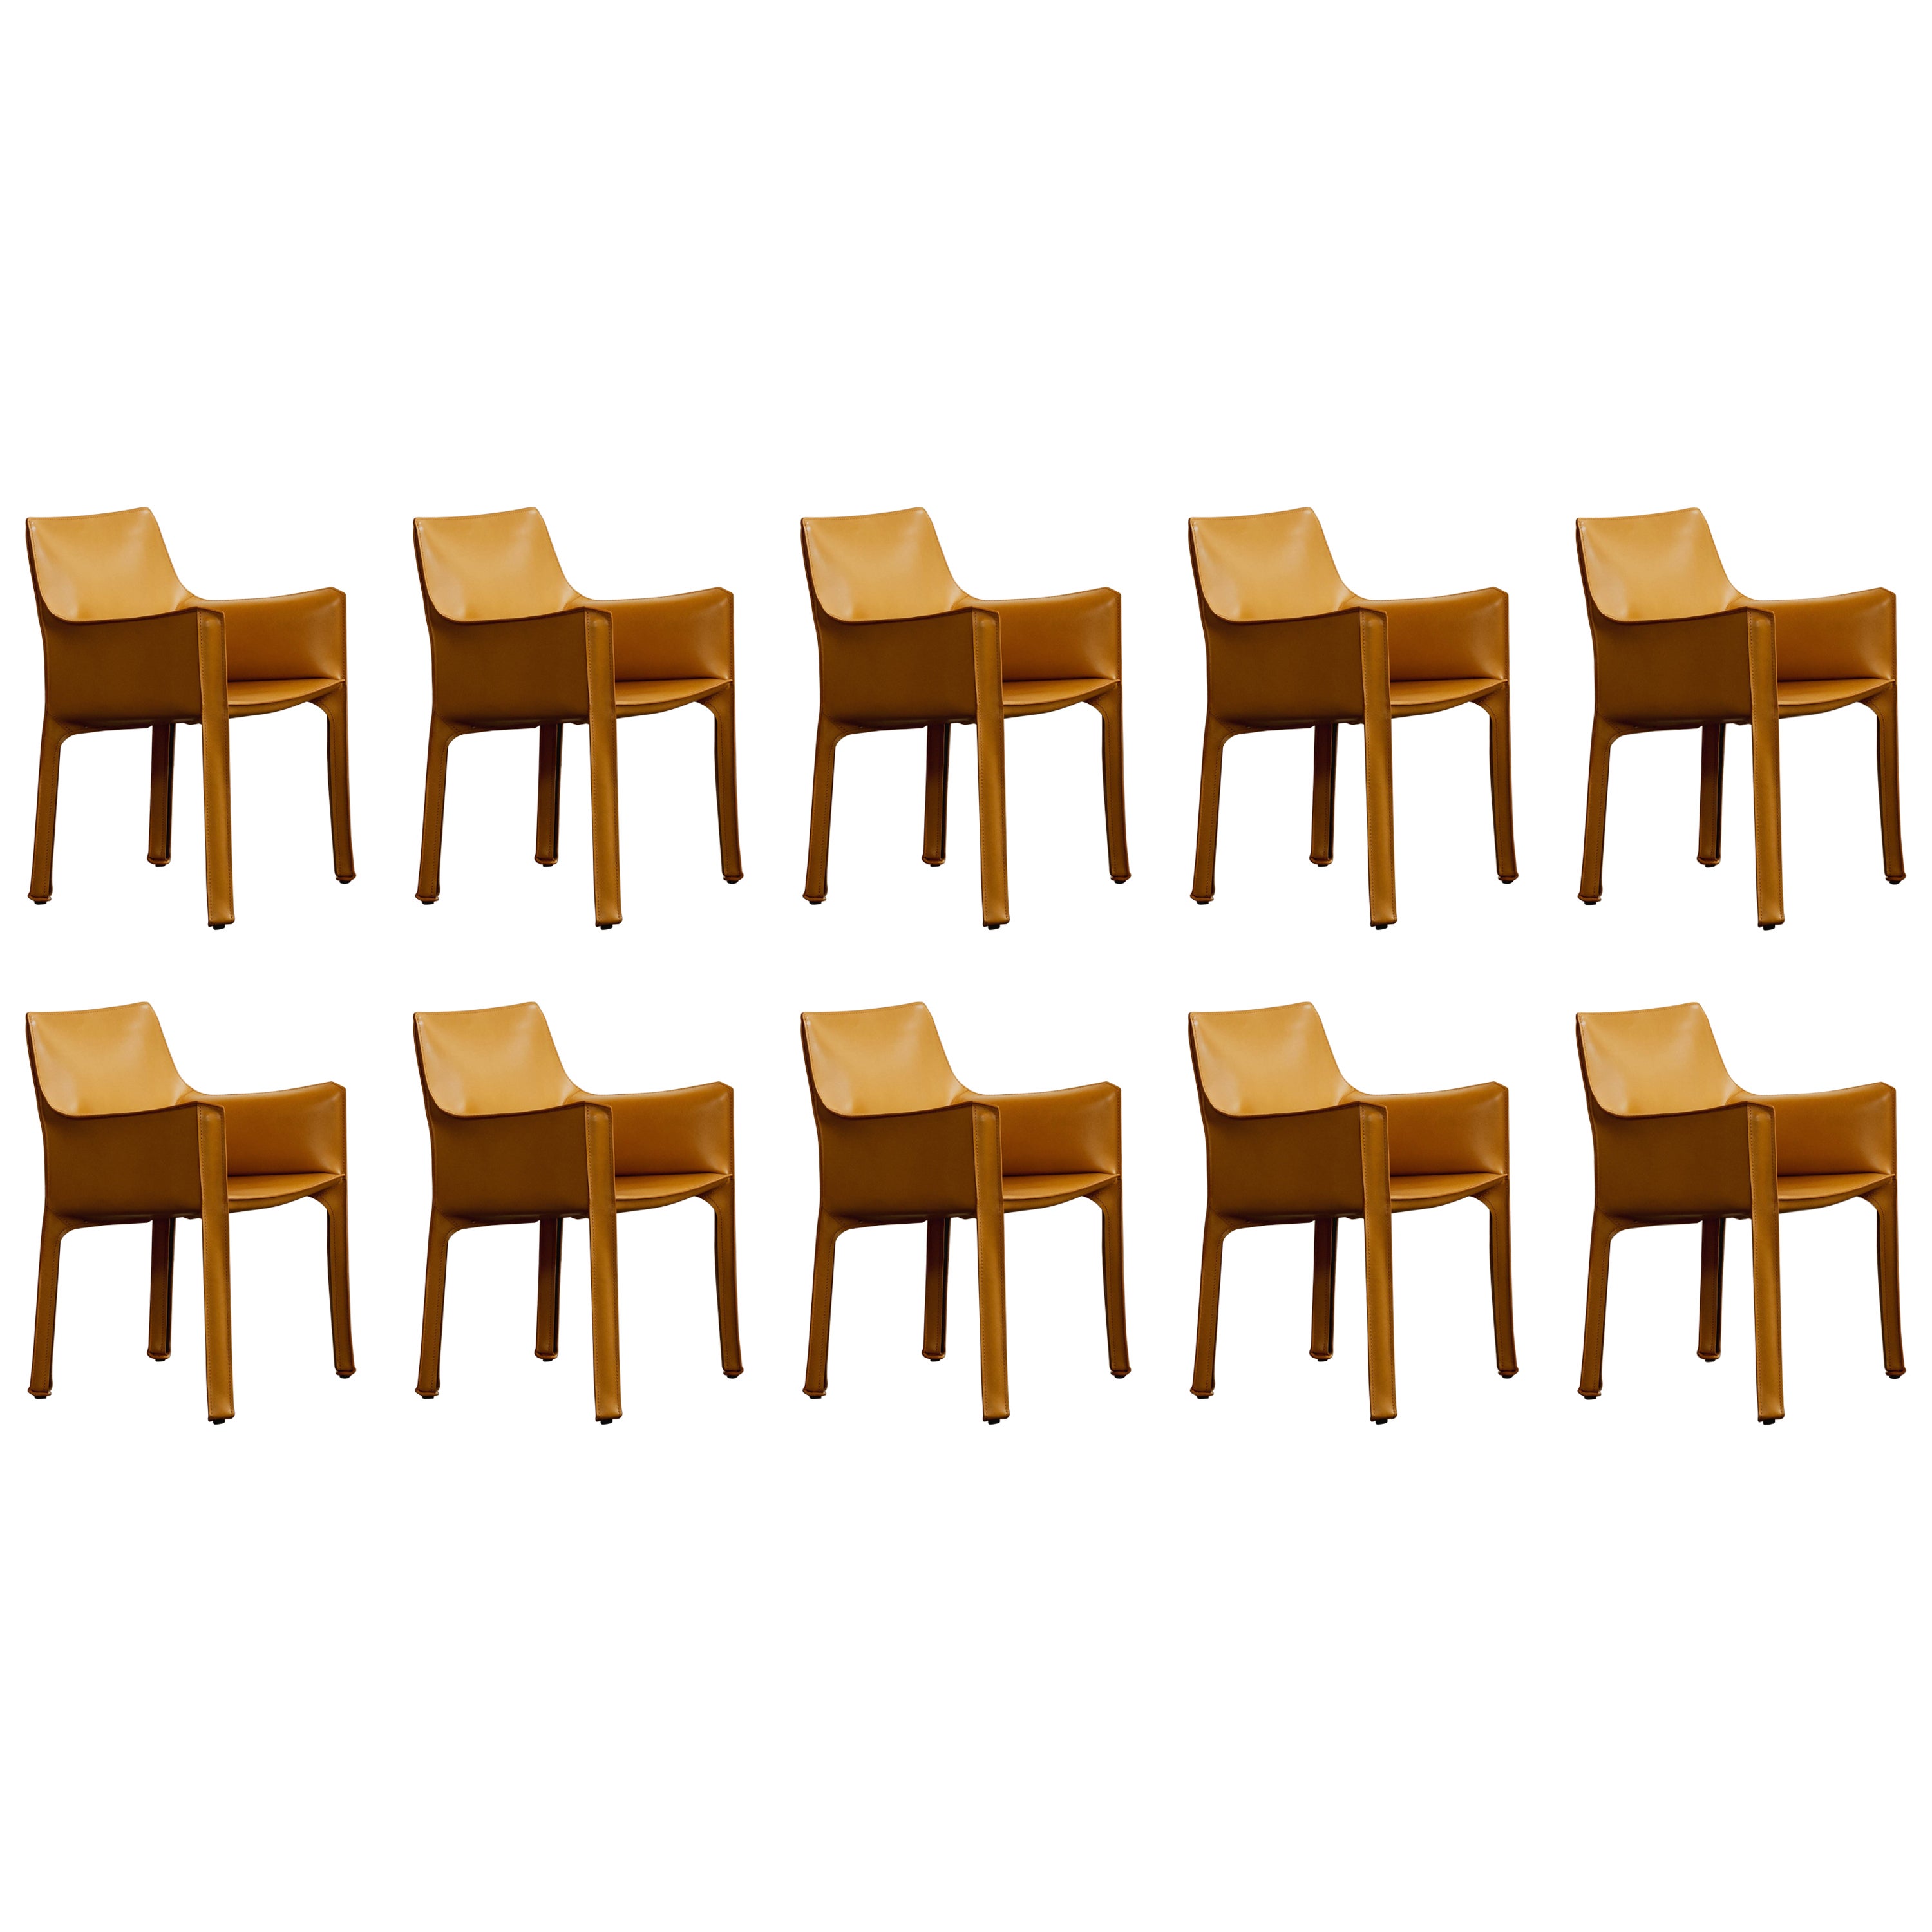 Mario Bellini "CAB 413” Dining Chairs for Cassina, 1977, Set of 10